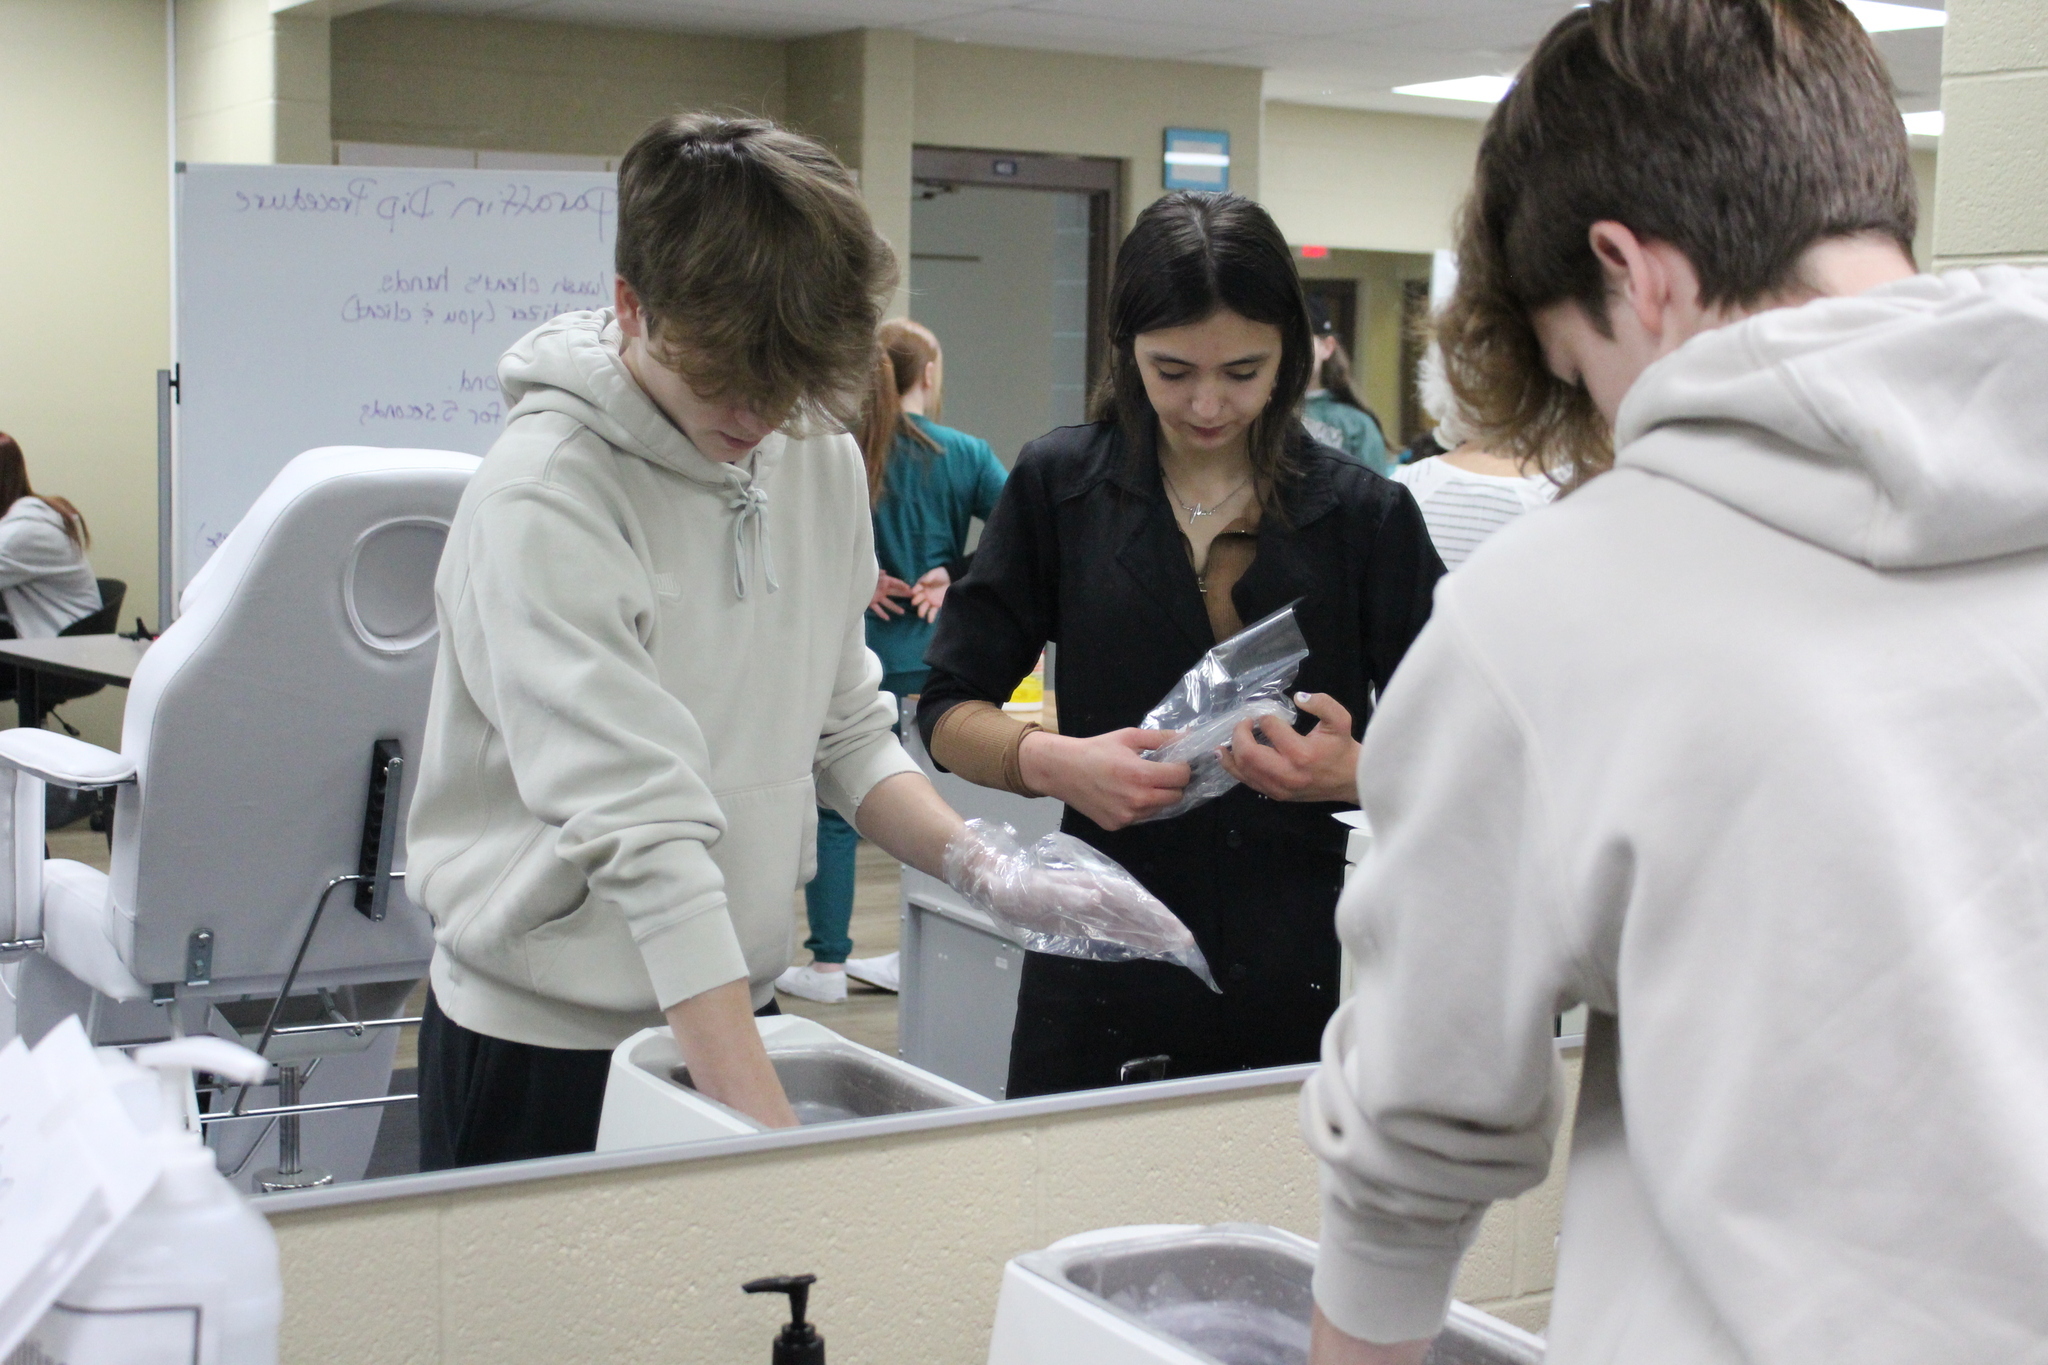 Cosmetology students providing services to others